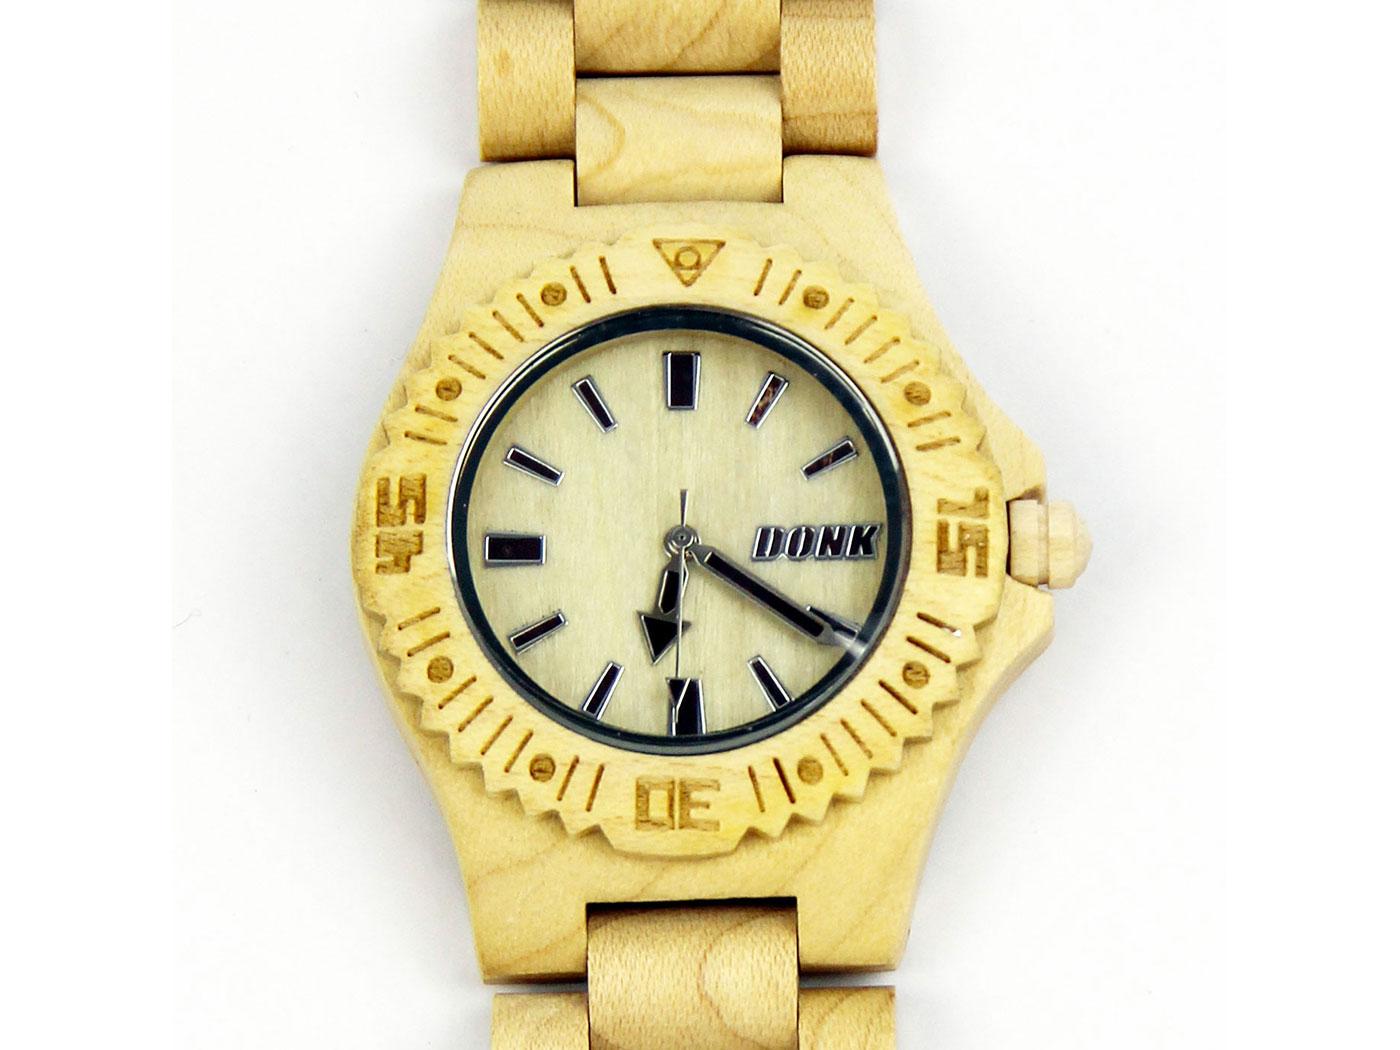 DONK Wood Watch in Classic Retro Light Brown DK001